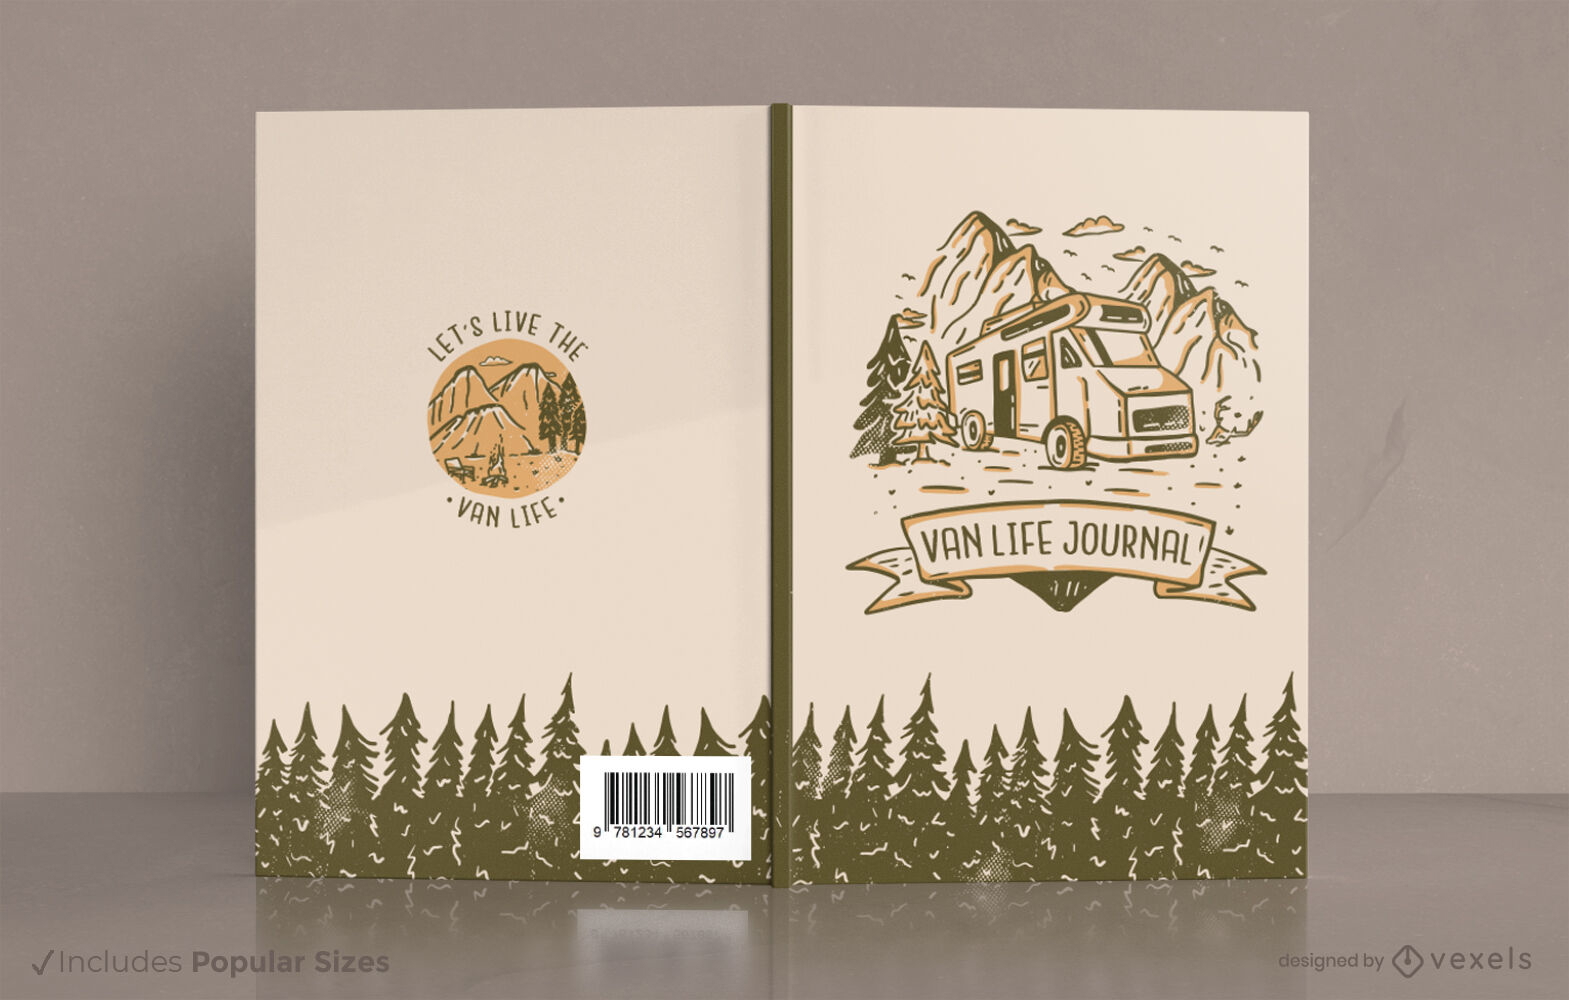 Van in the mountains book cover design